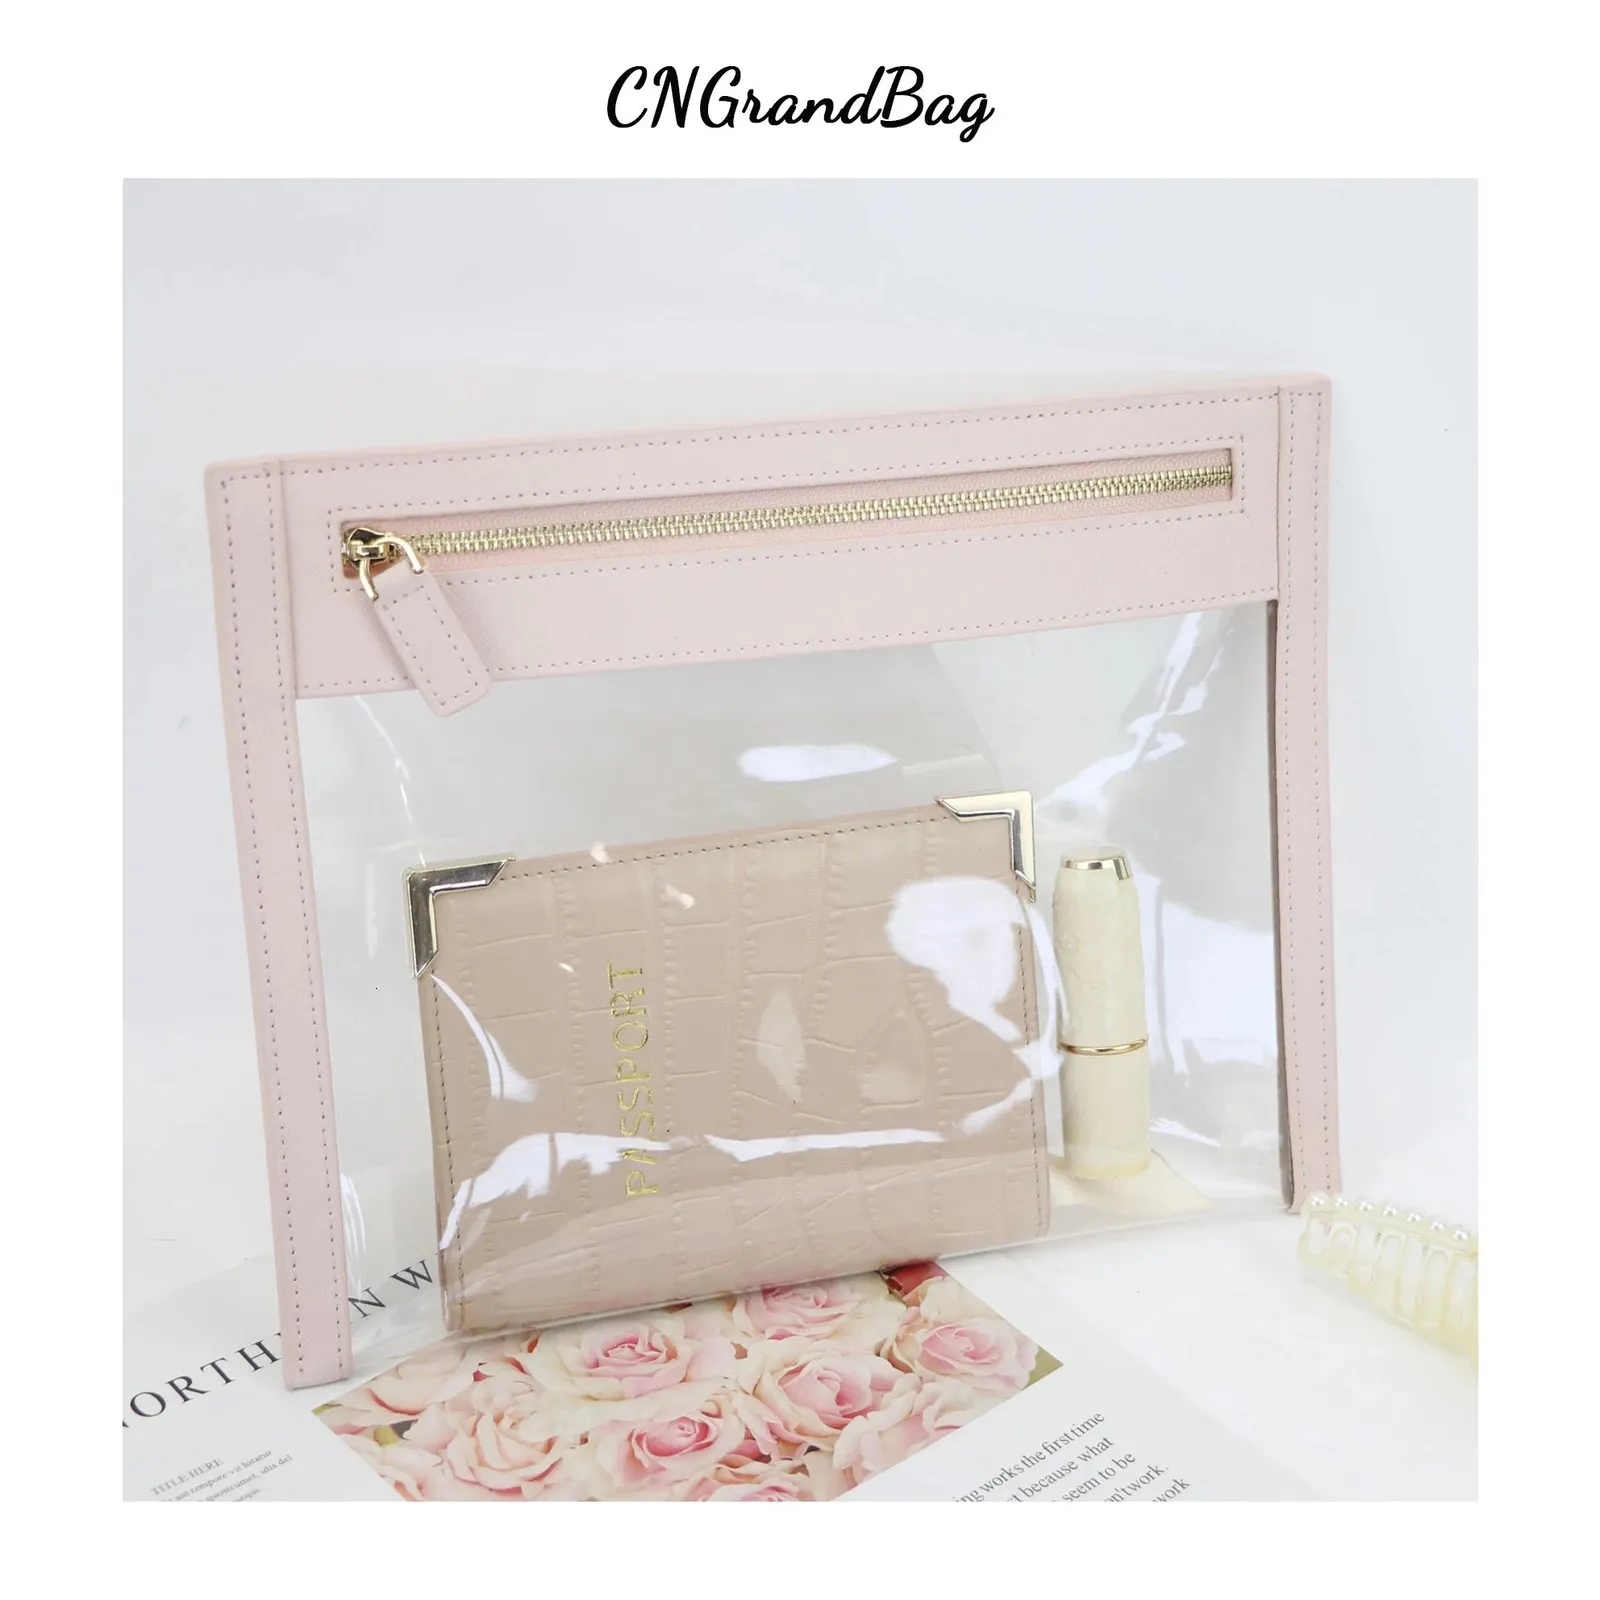 Cusstomized Letters Colorful Saffiano Leather Clear PVC Cosmetic Bag Ladies TPU Travel Organizer Wash Bag 240122